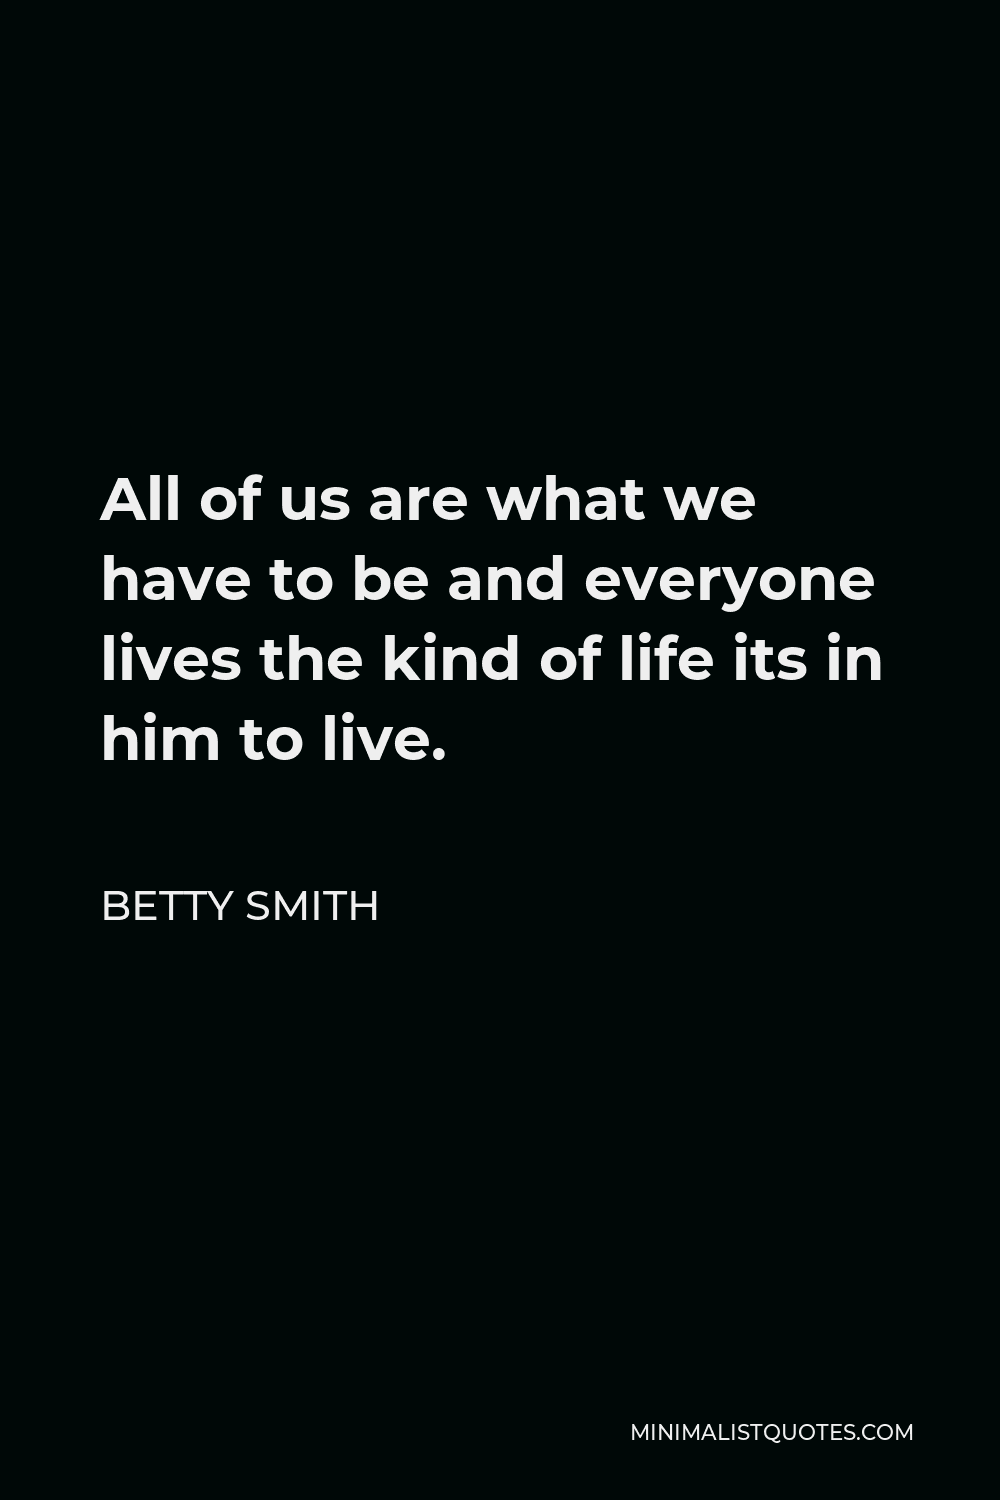 Betty Smith Quote - All of us are what we have to be and everyone lives the kind of life its in him to live.